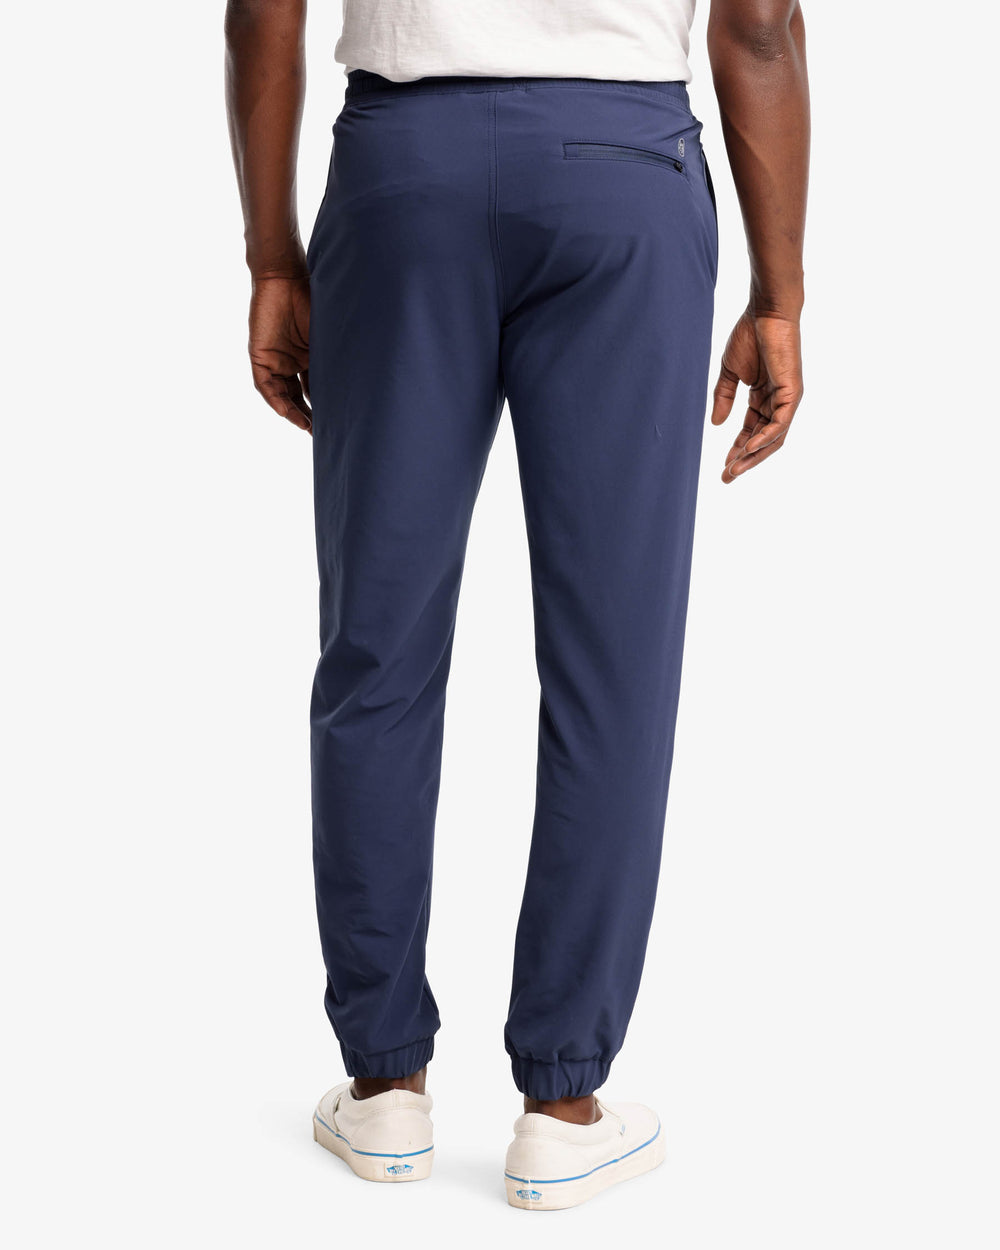 The back view of the The Excursion Performance Jogger by Southern Tide - True Navy